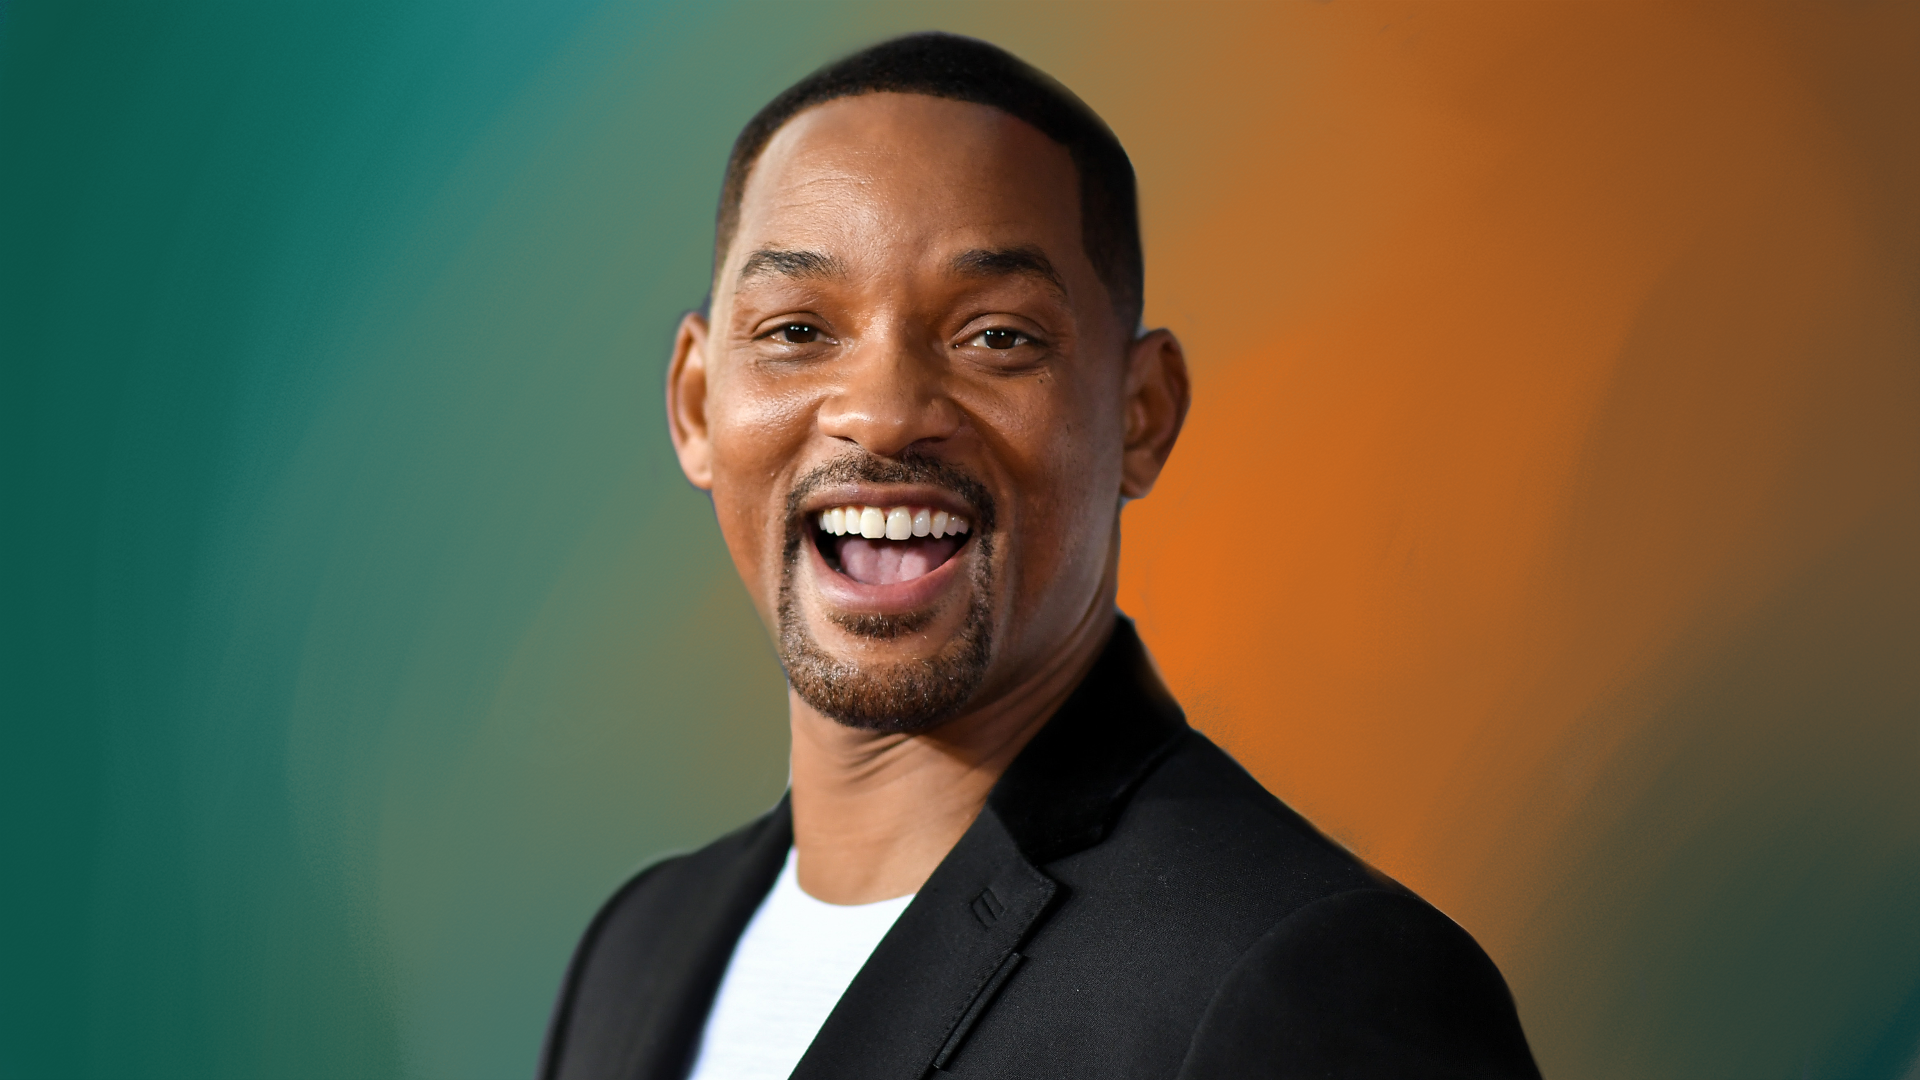 will smith quotes on life